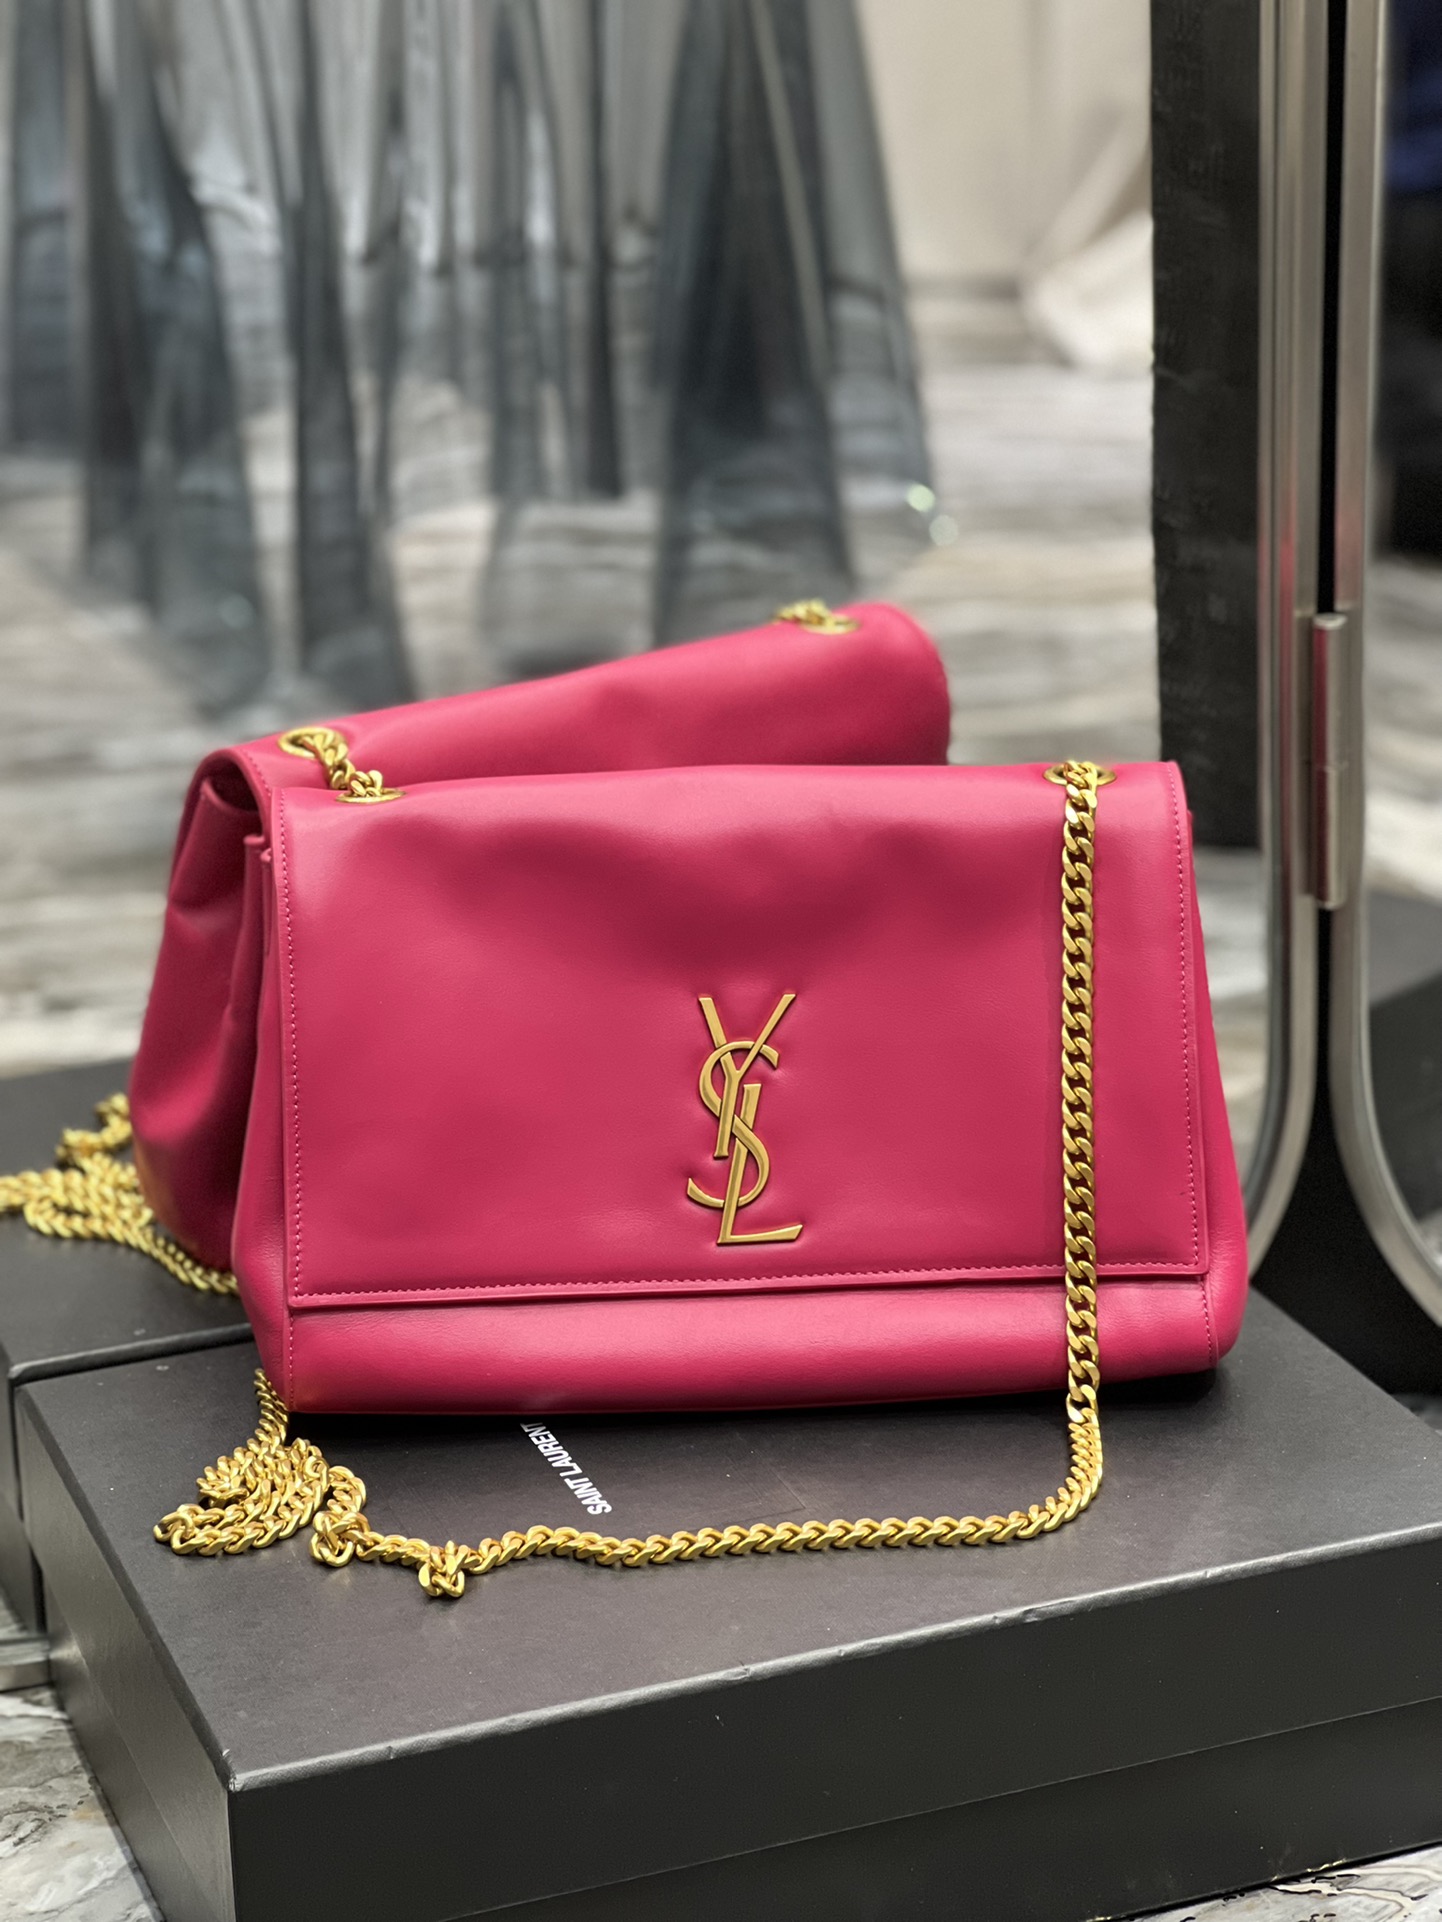 2022 cheap Saint Laurent kate medium reversible chain bag in suede and smooth leather MAGENTA PINK